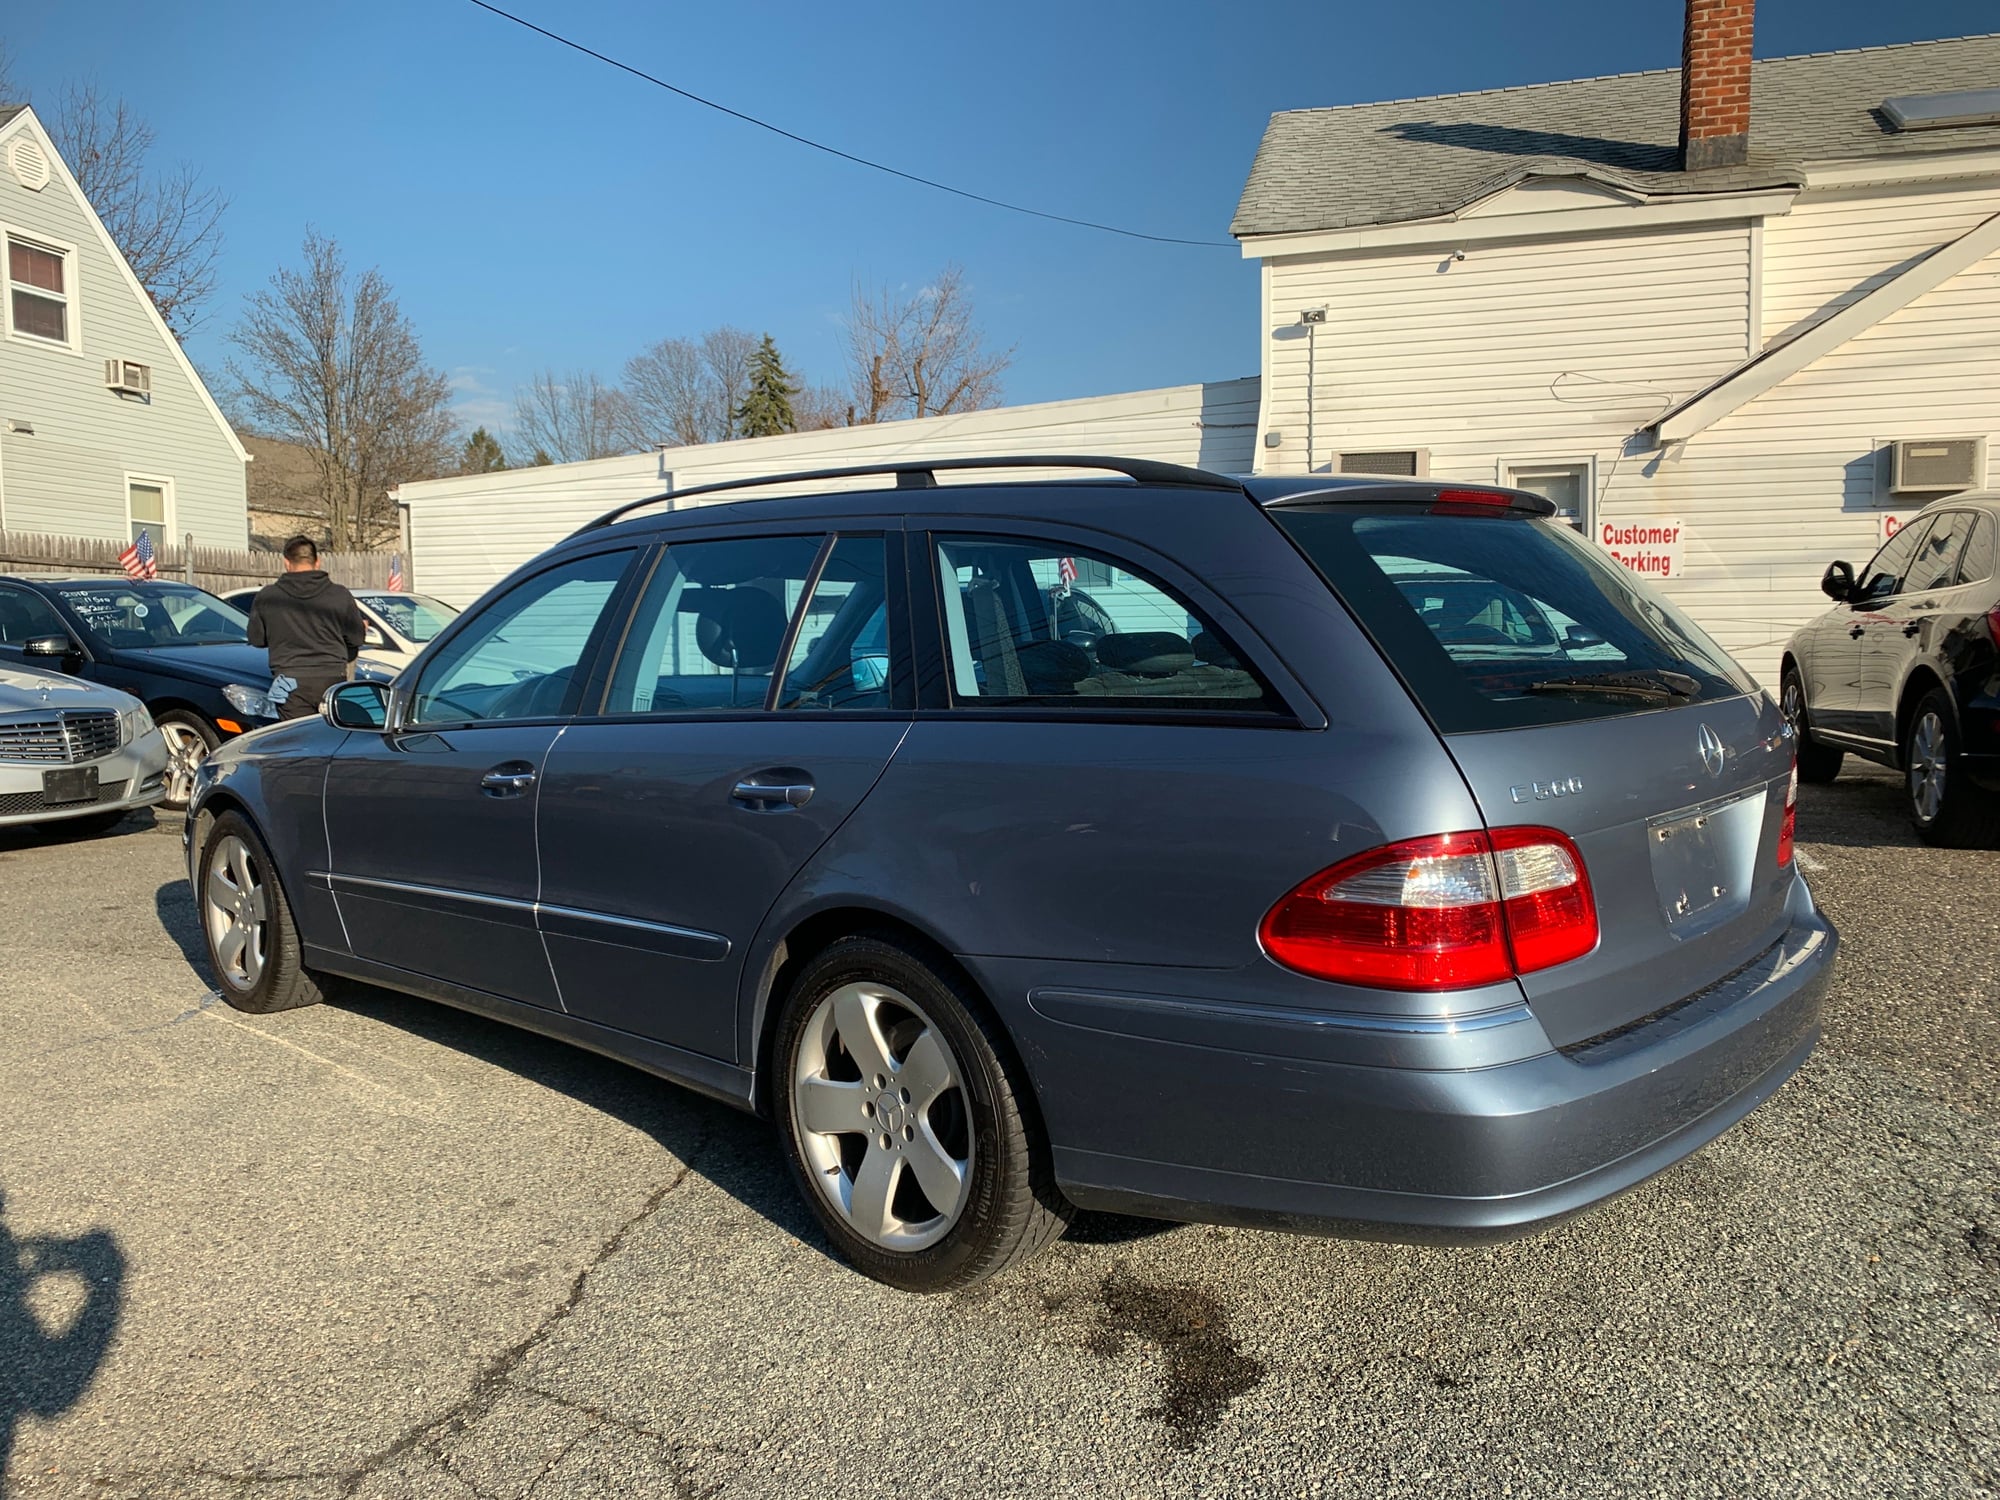 2005 Mercedes-Benz E500 - 2005 E500 4matic Wagon *3 owners, dealer maintained* - Used - VIN WDBUH83J35X165664 - 139,000 Miles - 8 cyl - 4WD - Automatic - Wagon - Blue - Merrick, NY 11566, United States